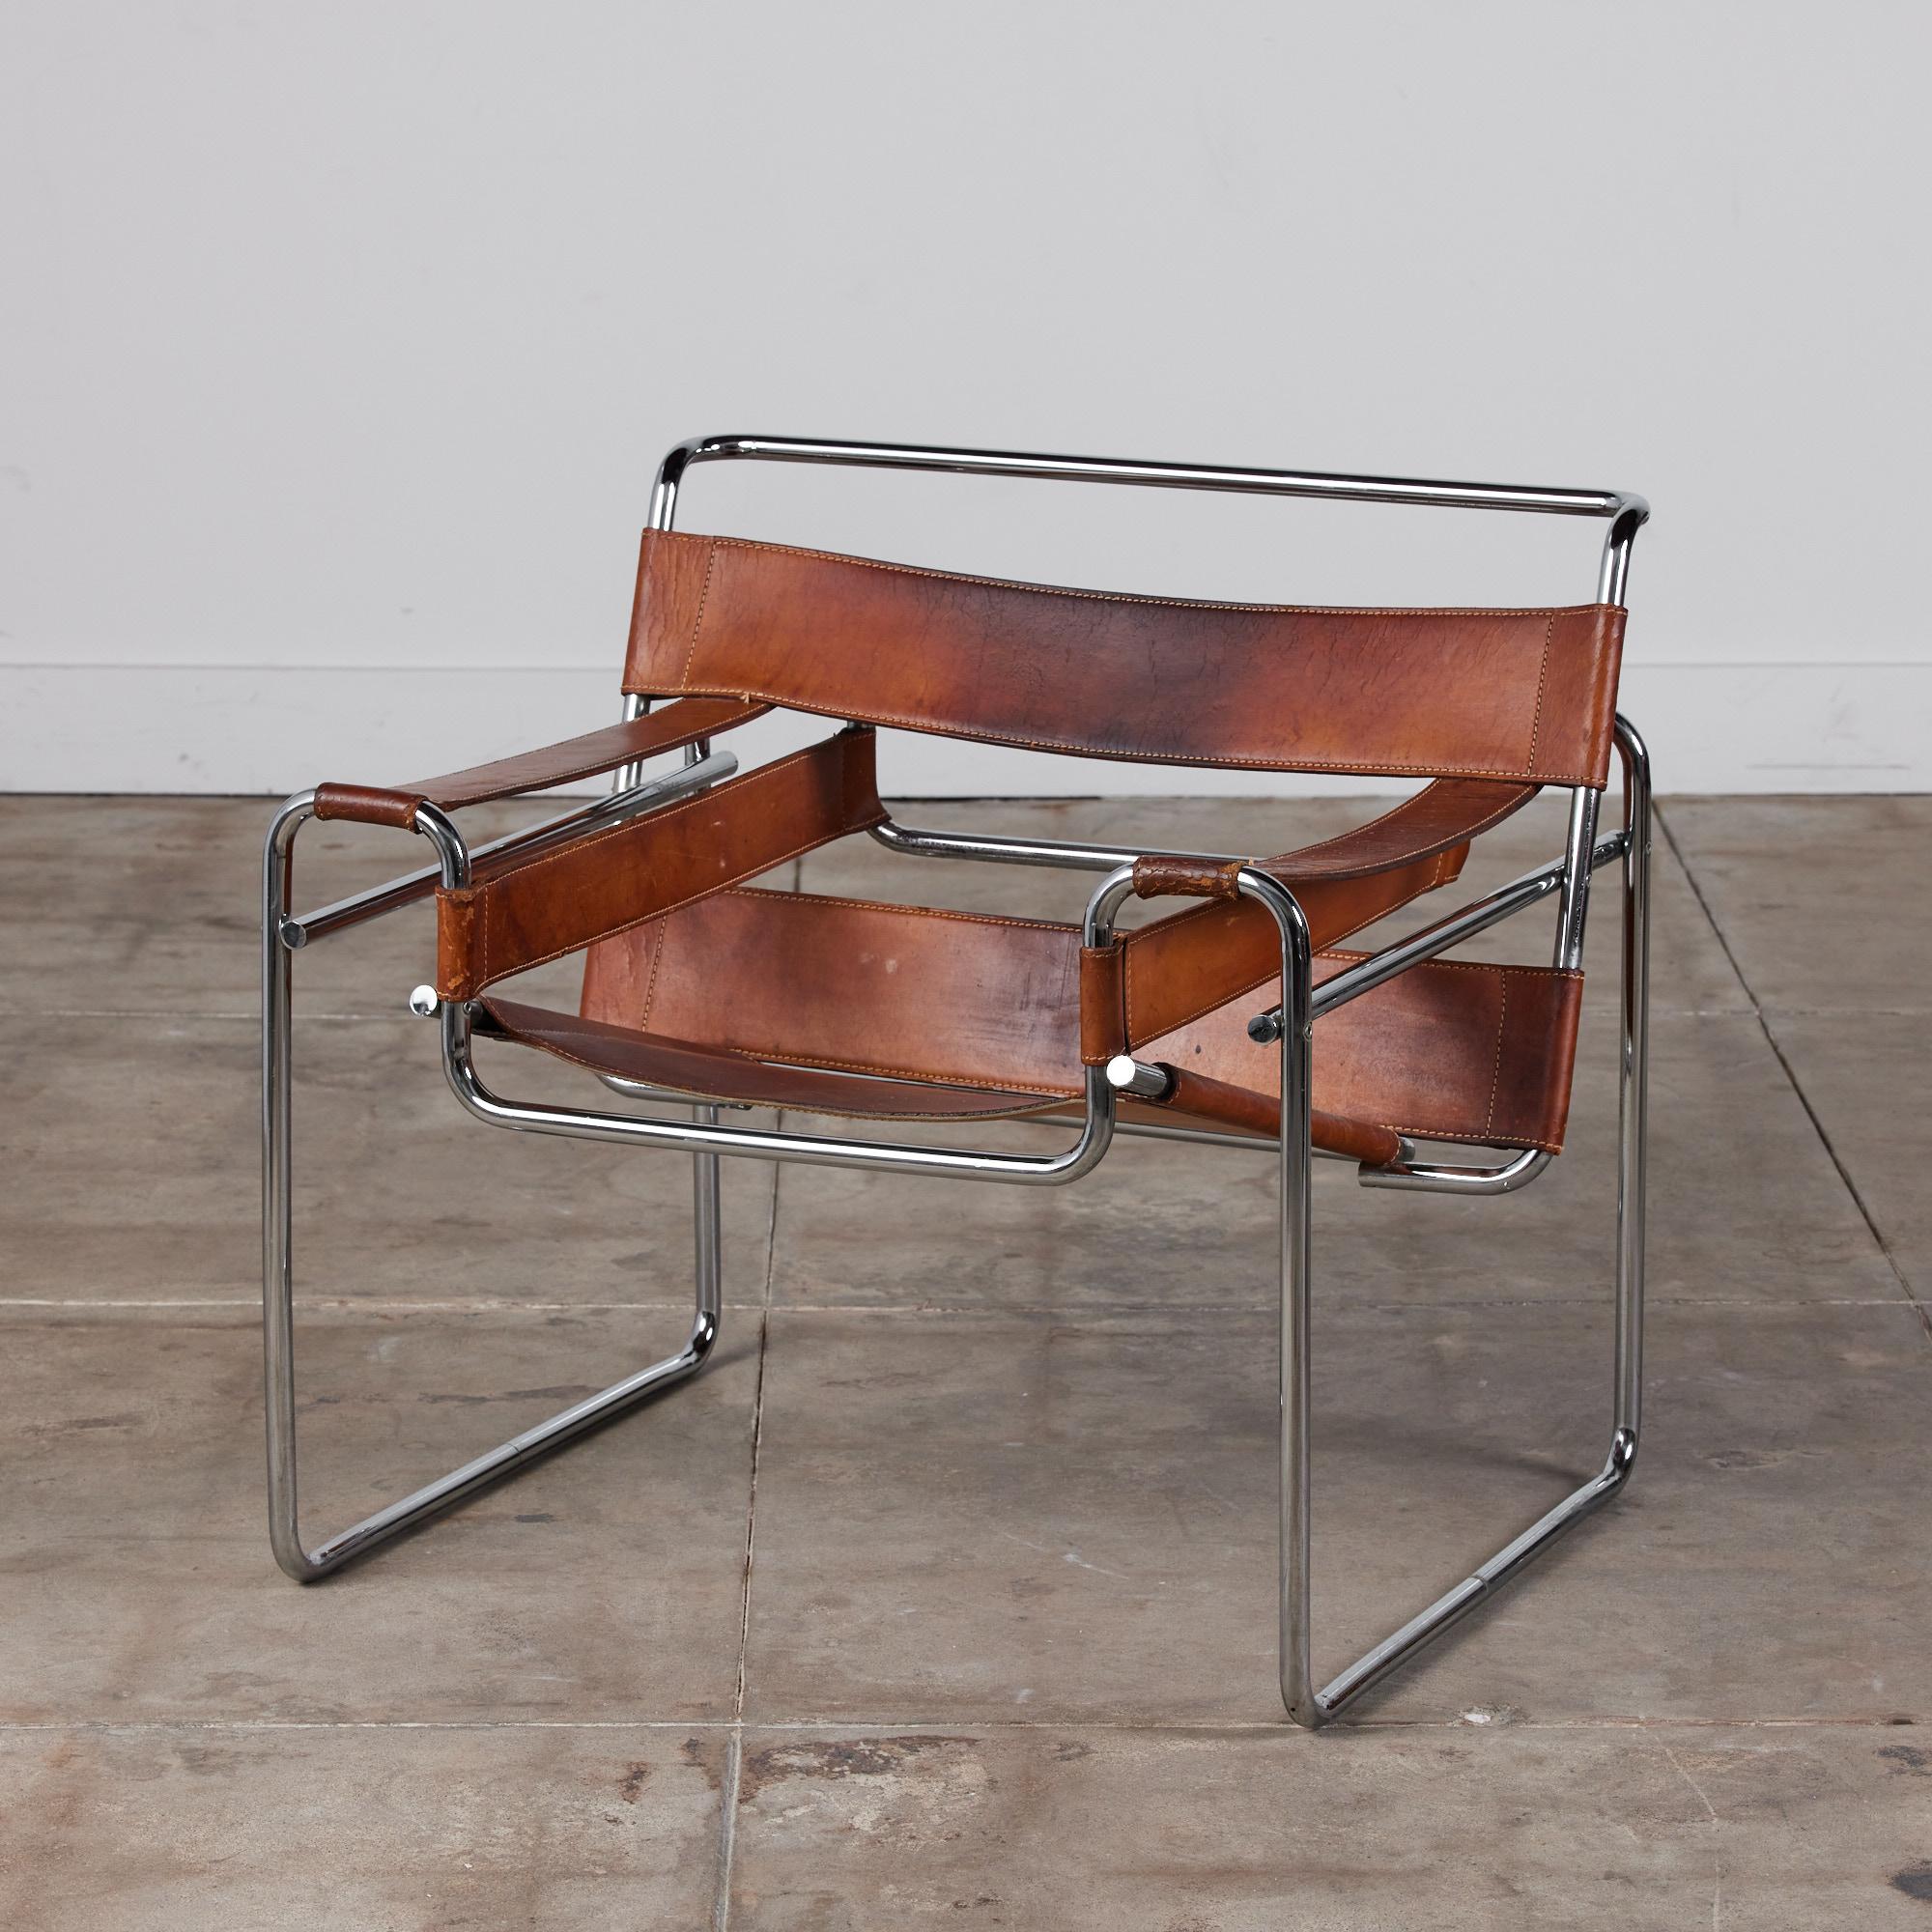 Wassily lounge chair by Marcel Breuer for Knoll International, c.1960s, USA. The model B3 chair showcases a perfectly patinated cognac leather straps on a chrome plated steel tubular frame.

Dimensions: 30.5